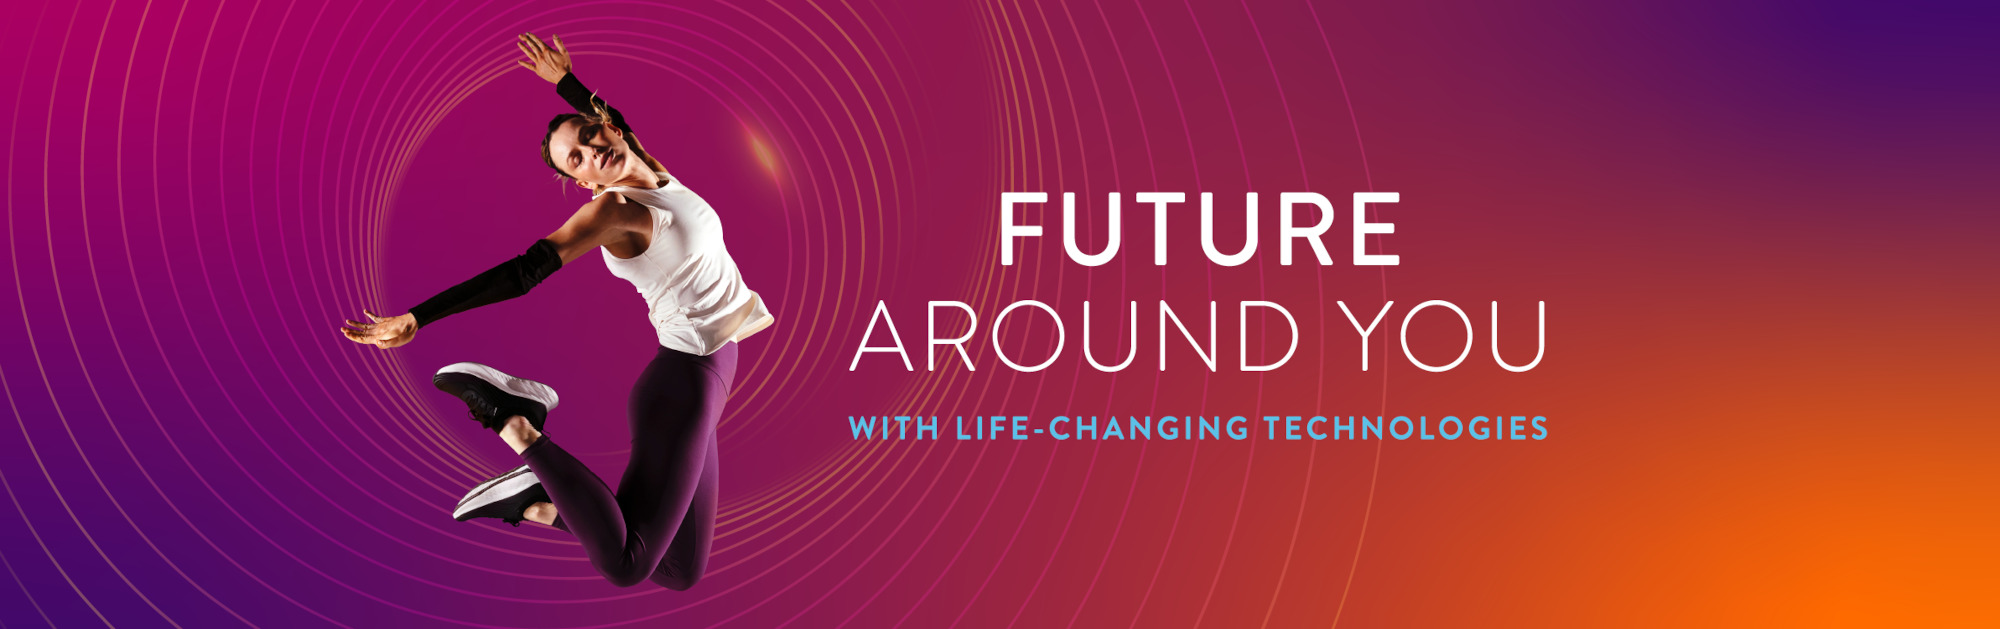 Future Around You with Life-Changing Technologies